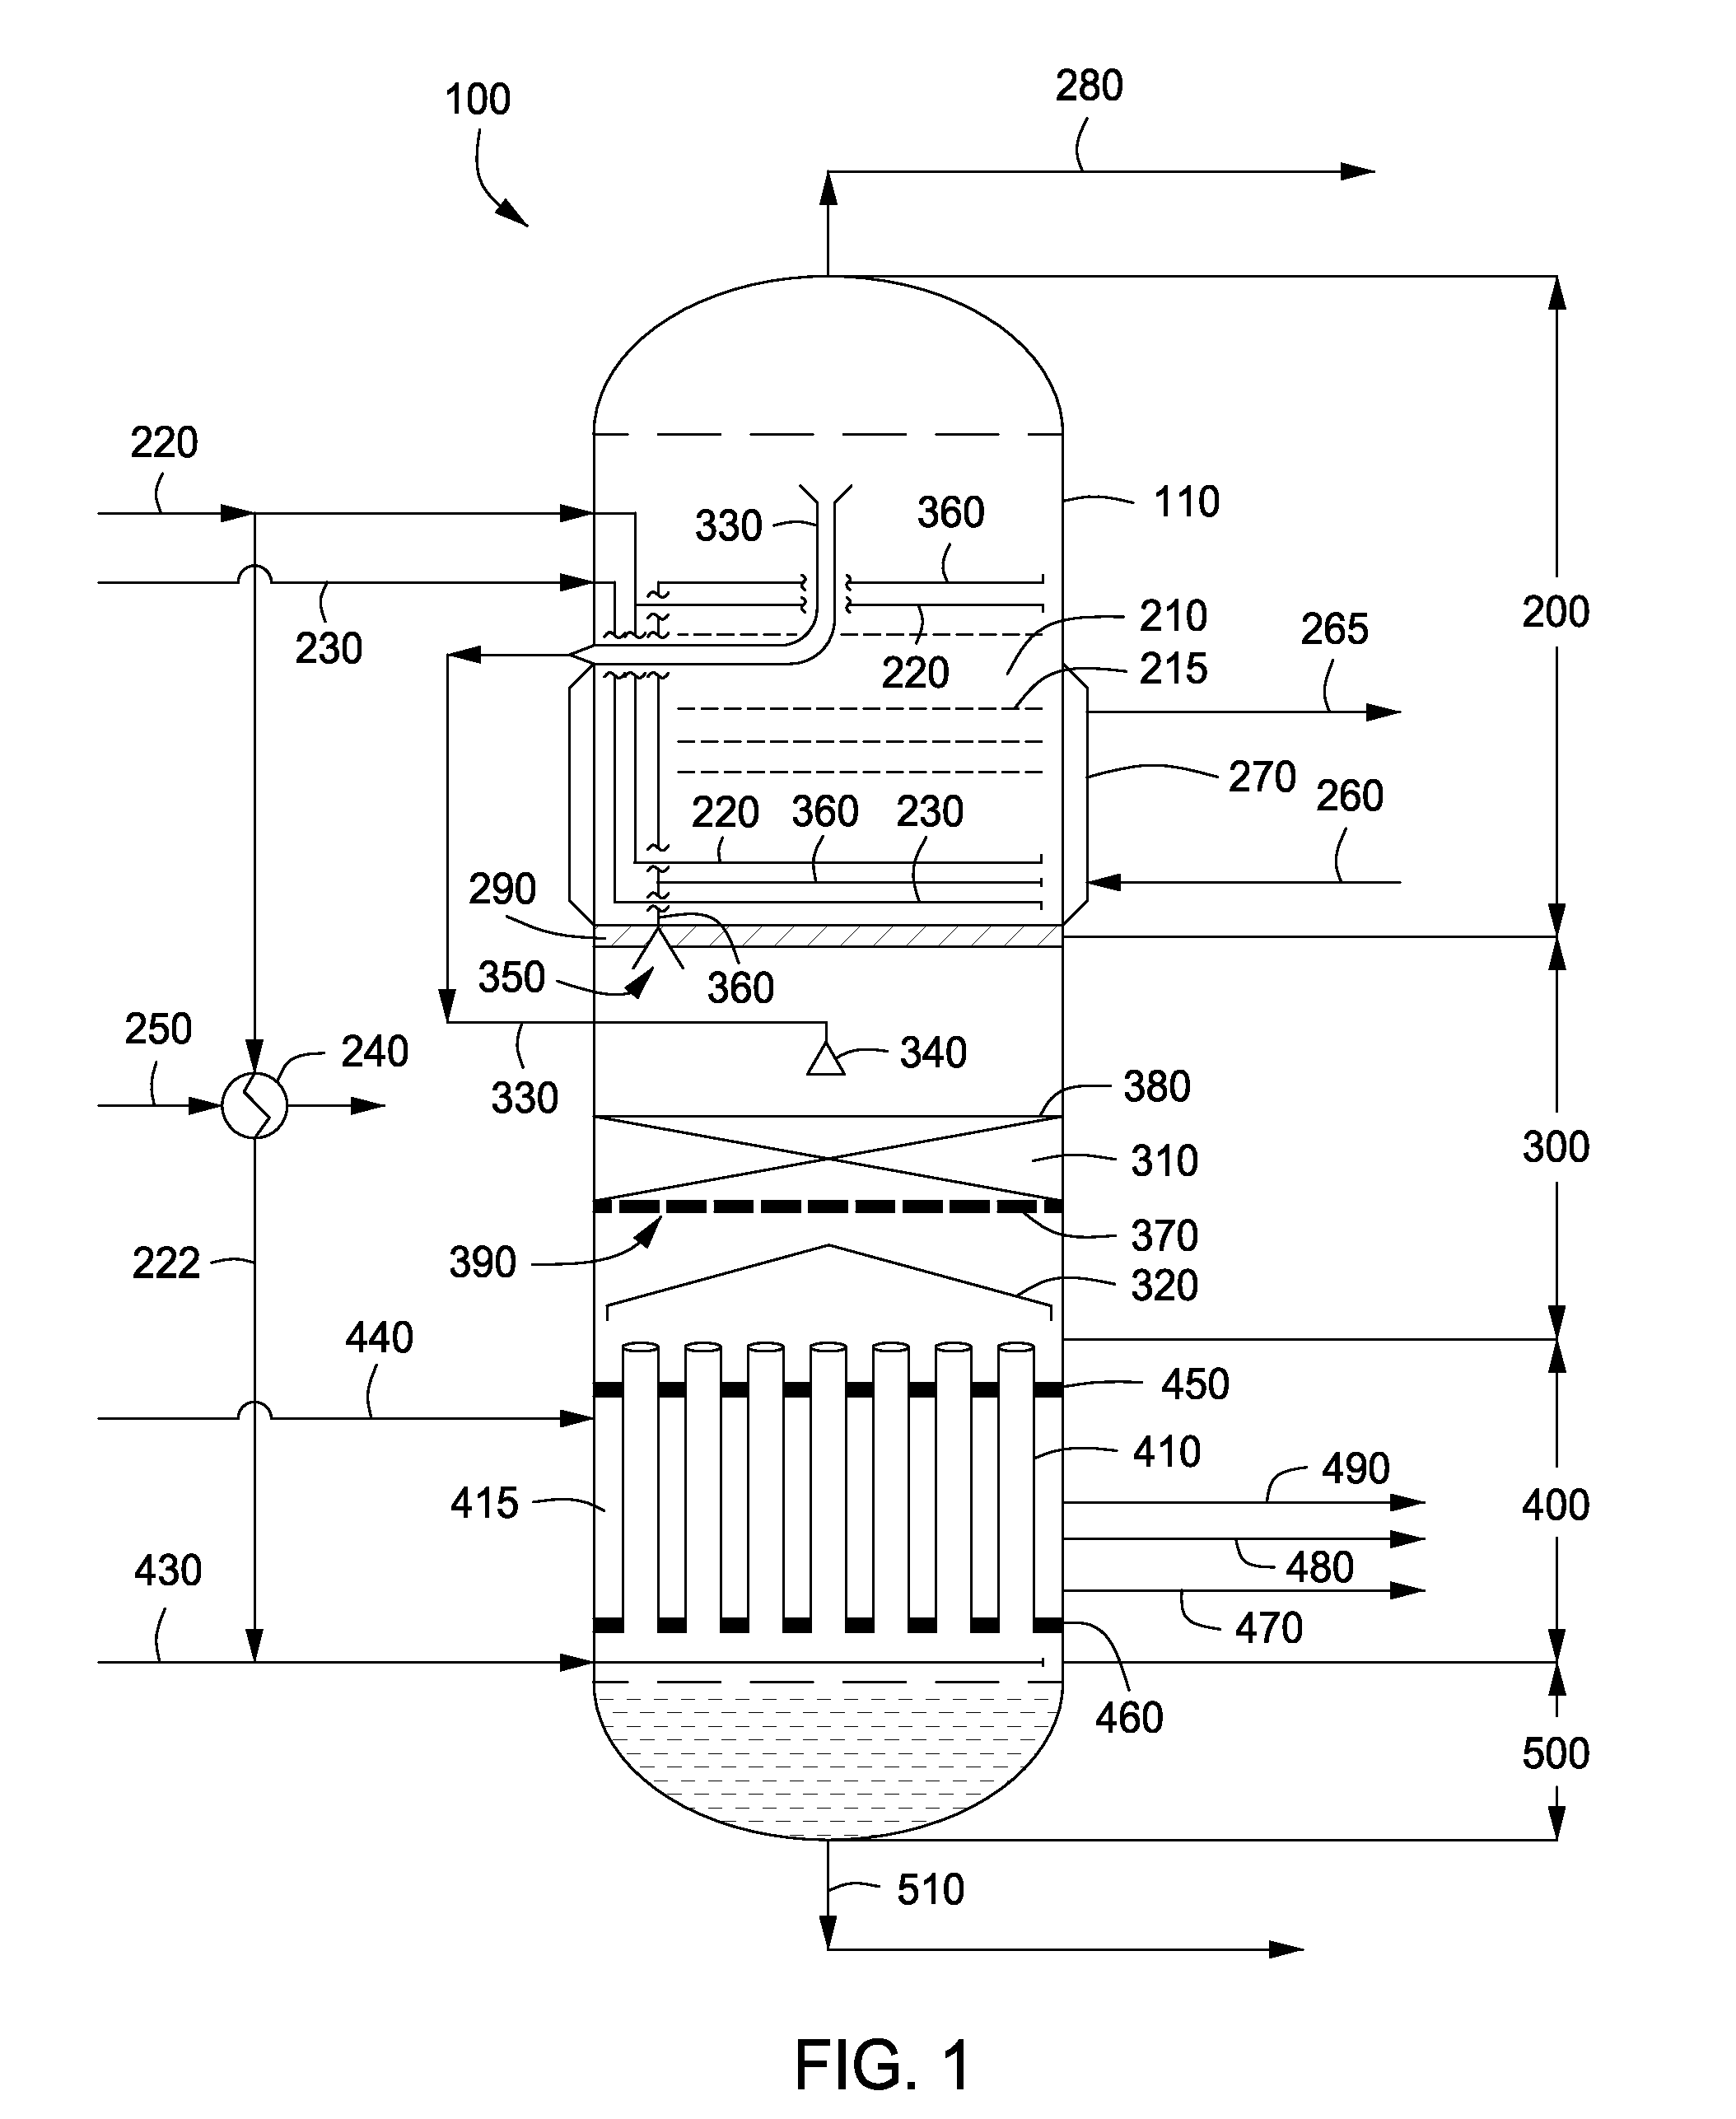 Apparatus and methods for urea production